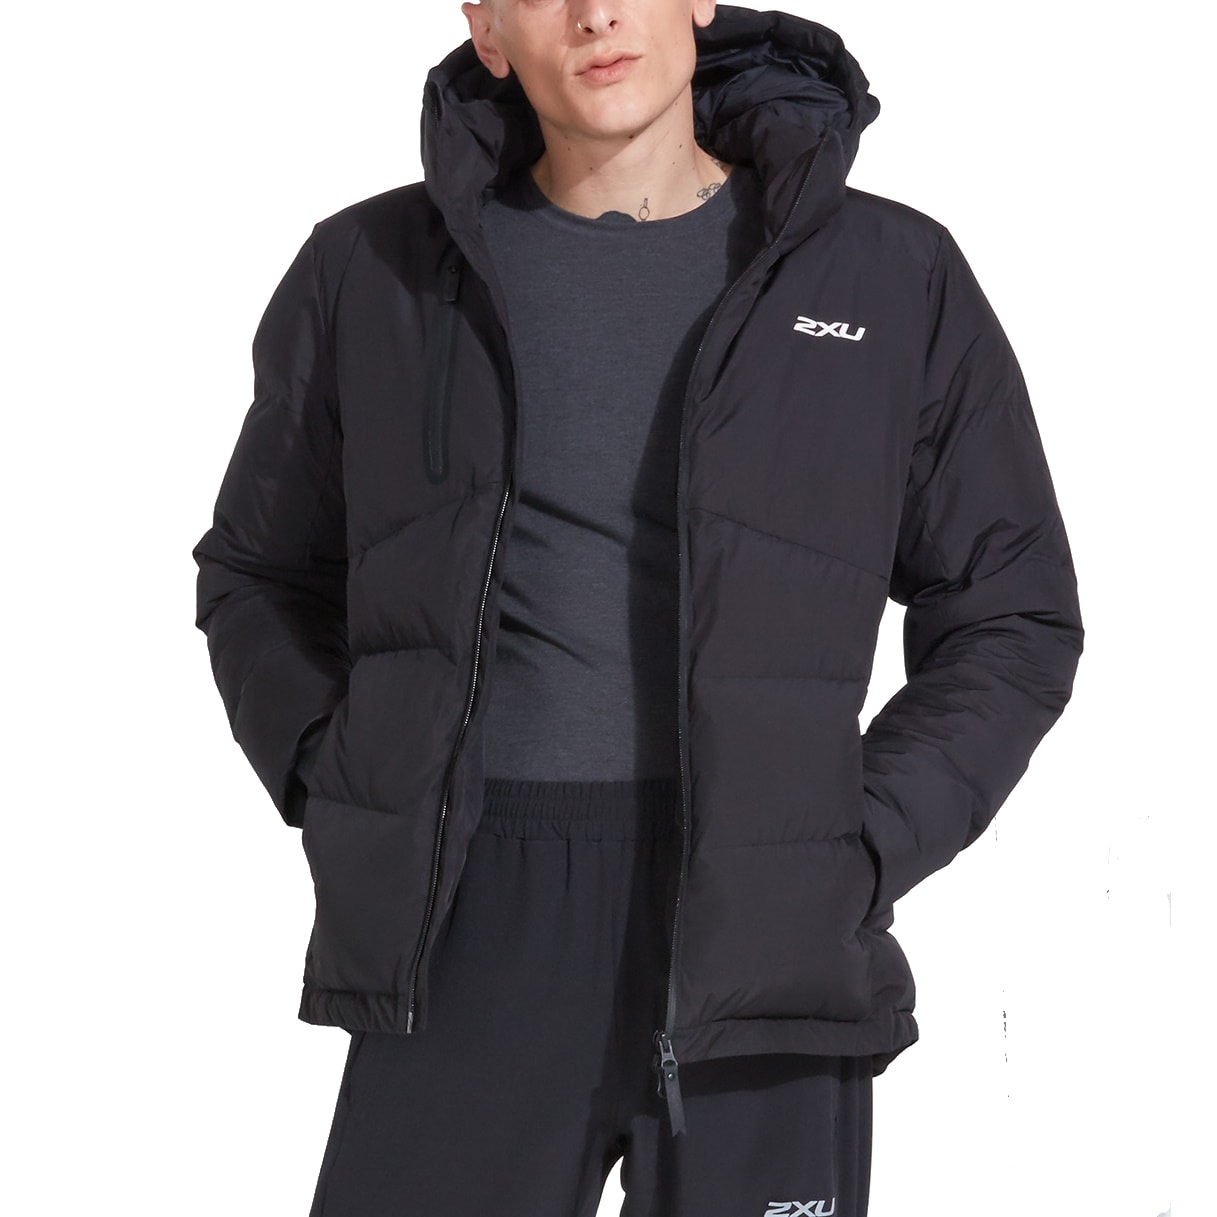 Buy 2XU Insulation Jacket from Outnorth